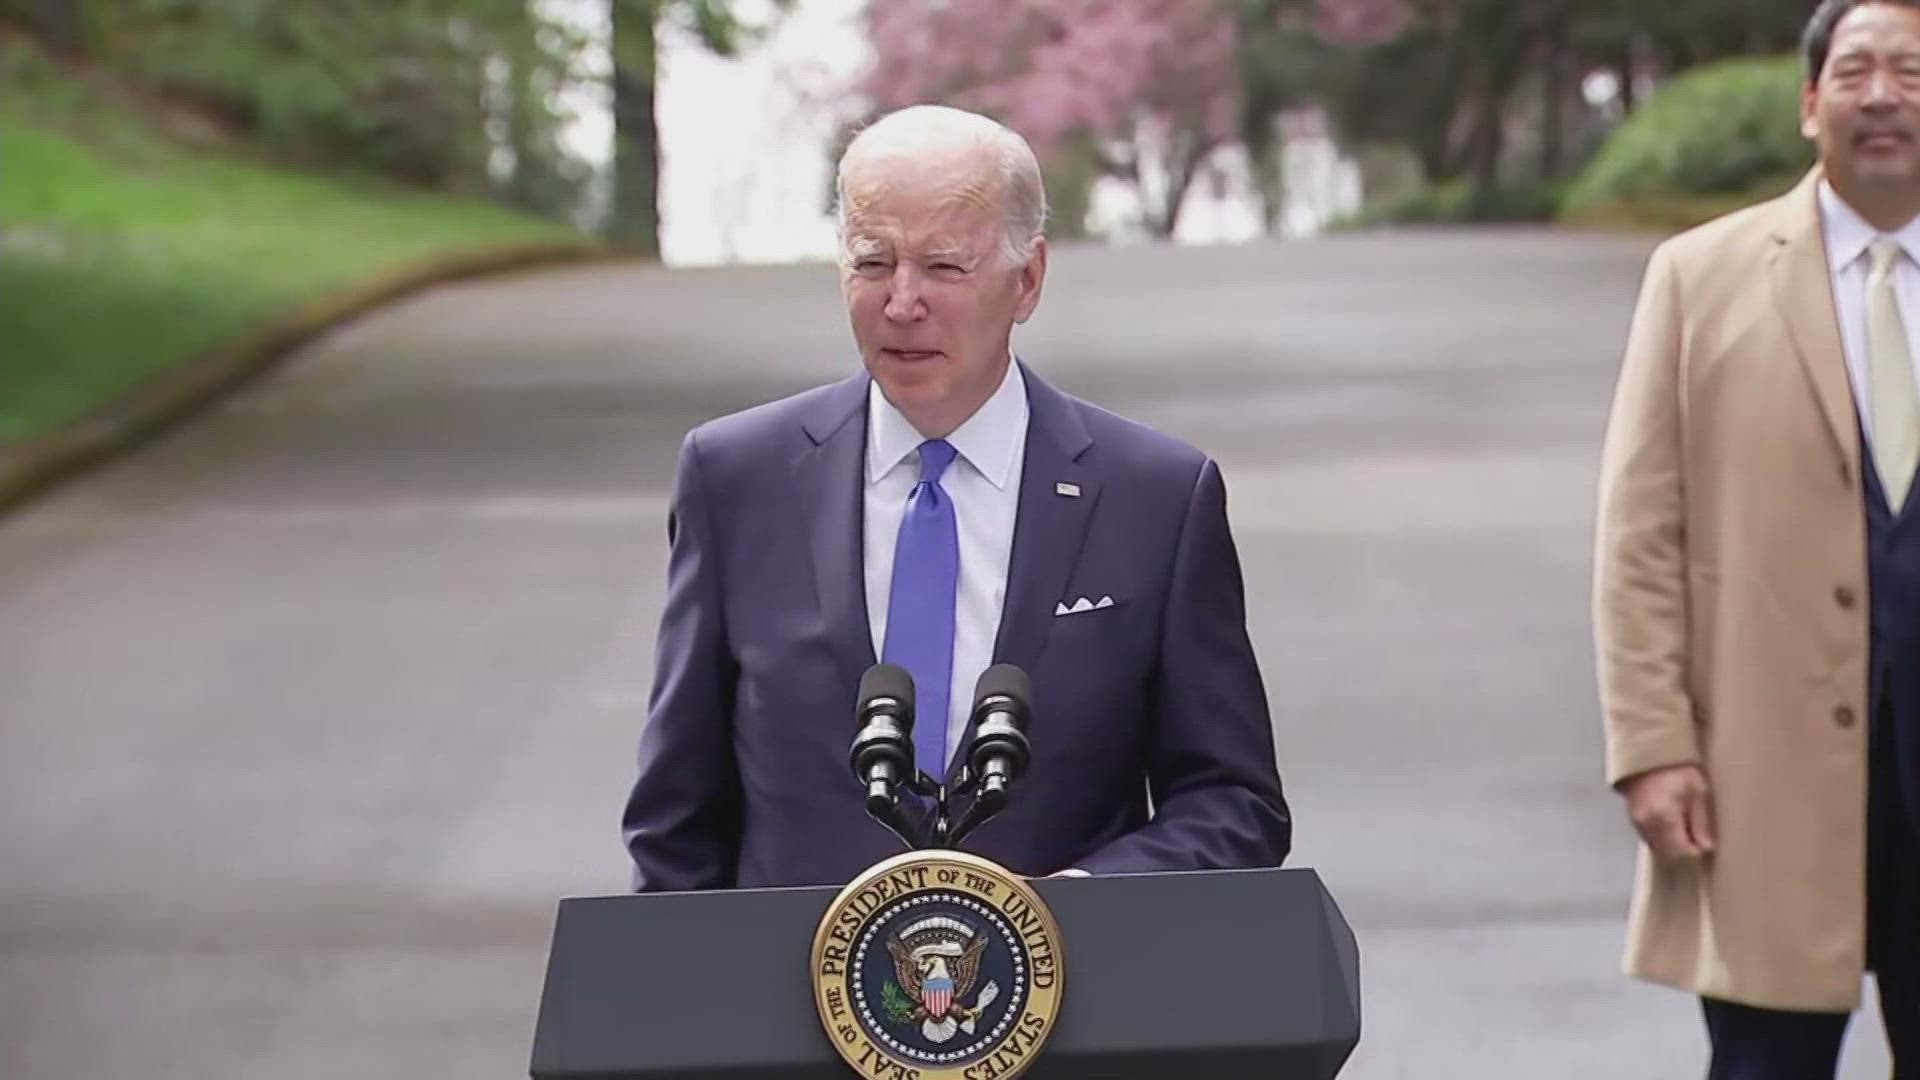 Biden expressed frustration with Republicans and some Democrats for preventing progress on climate change plans and challenged them to get legislation to his desk.